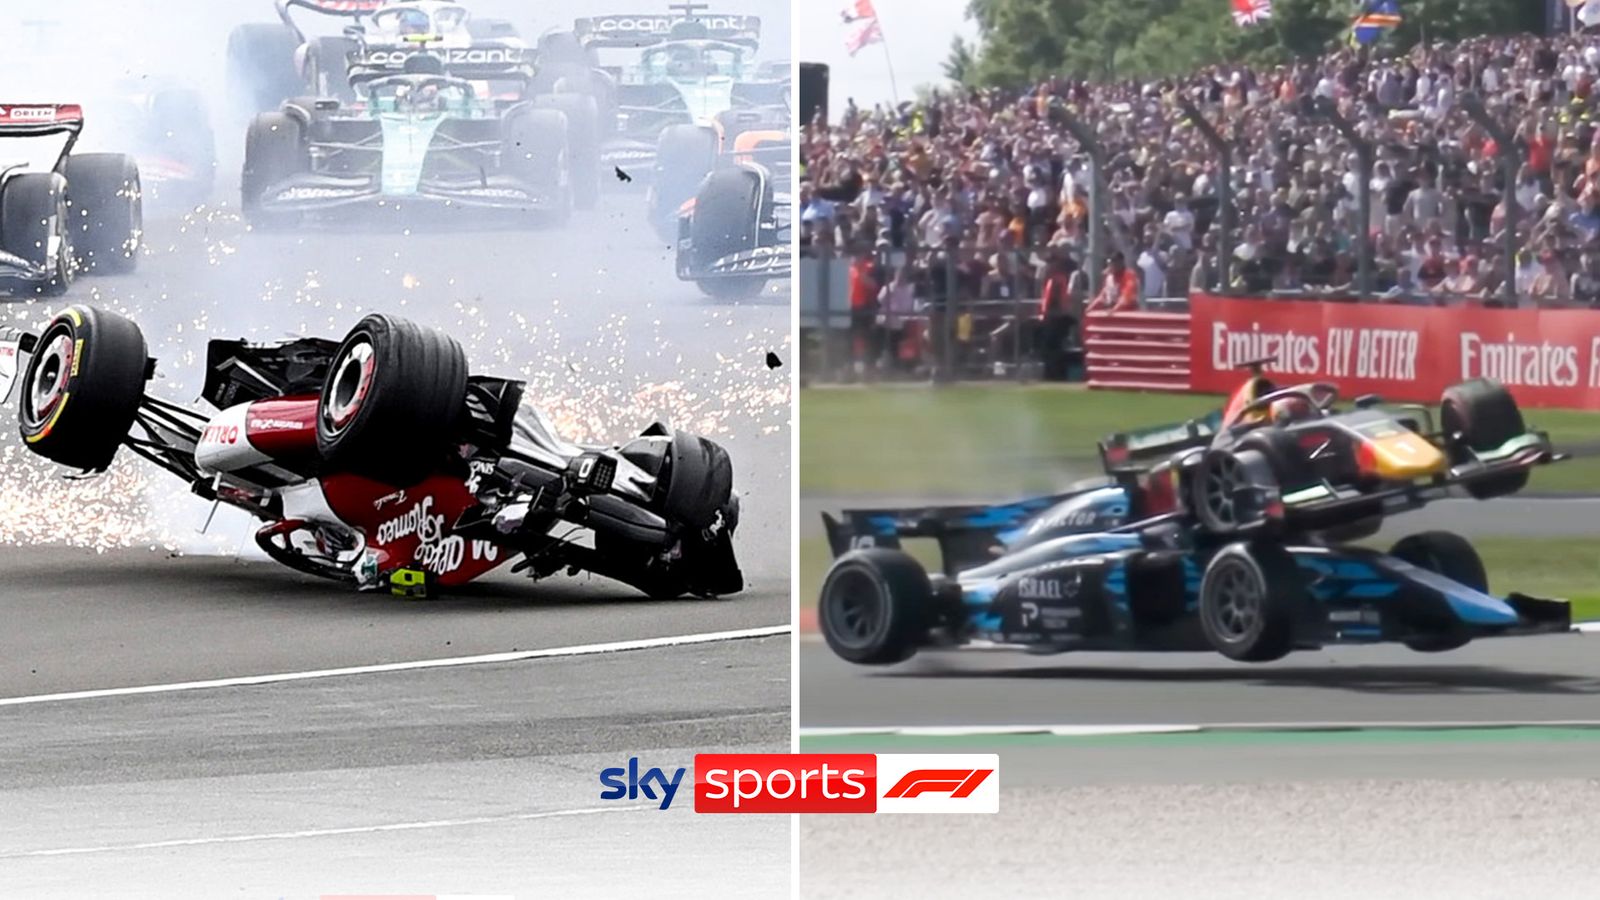 Carlos Sainz says F1’s halo ‘saved two lives’ at Silverstone after Zhou Guanyu, Roy Nissany crashes